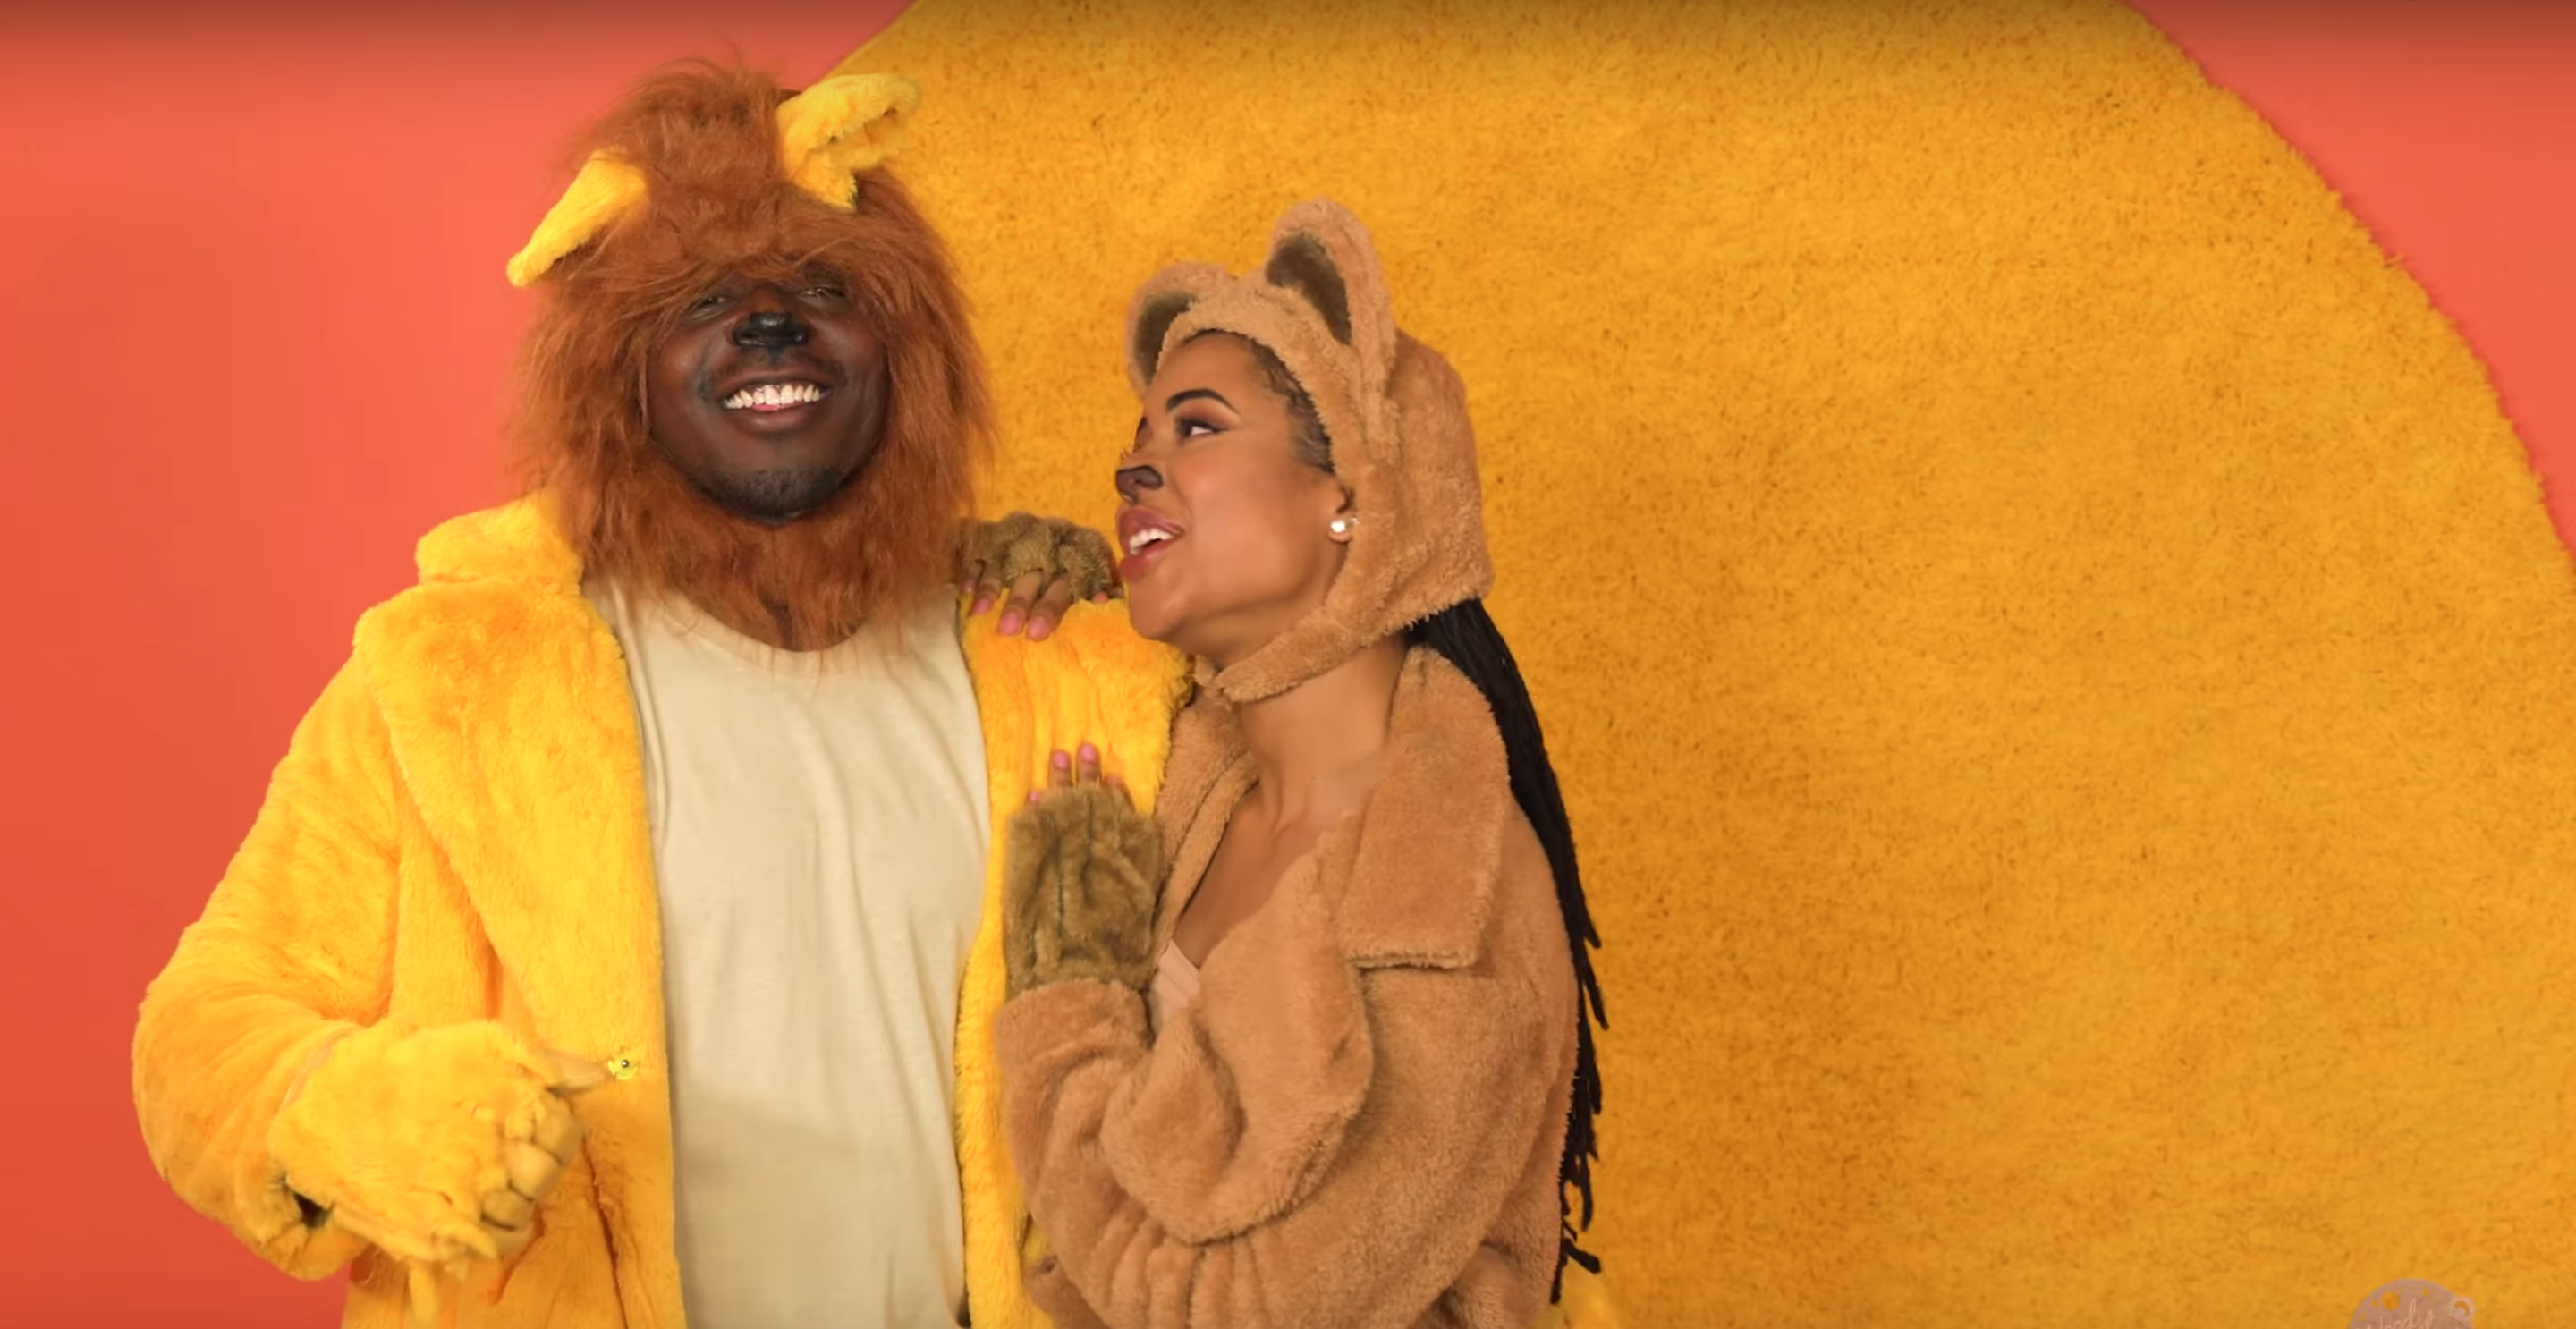 Xxx King2019 - A 'Lion King' Porn Parody Exists and We Can Feel the Love